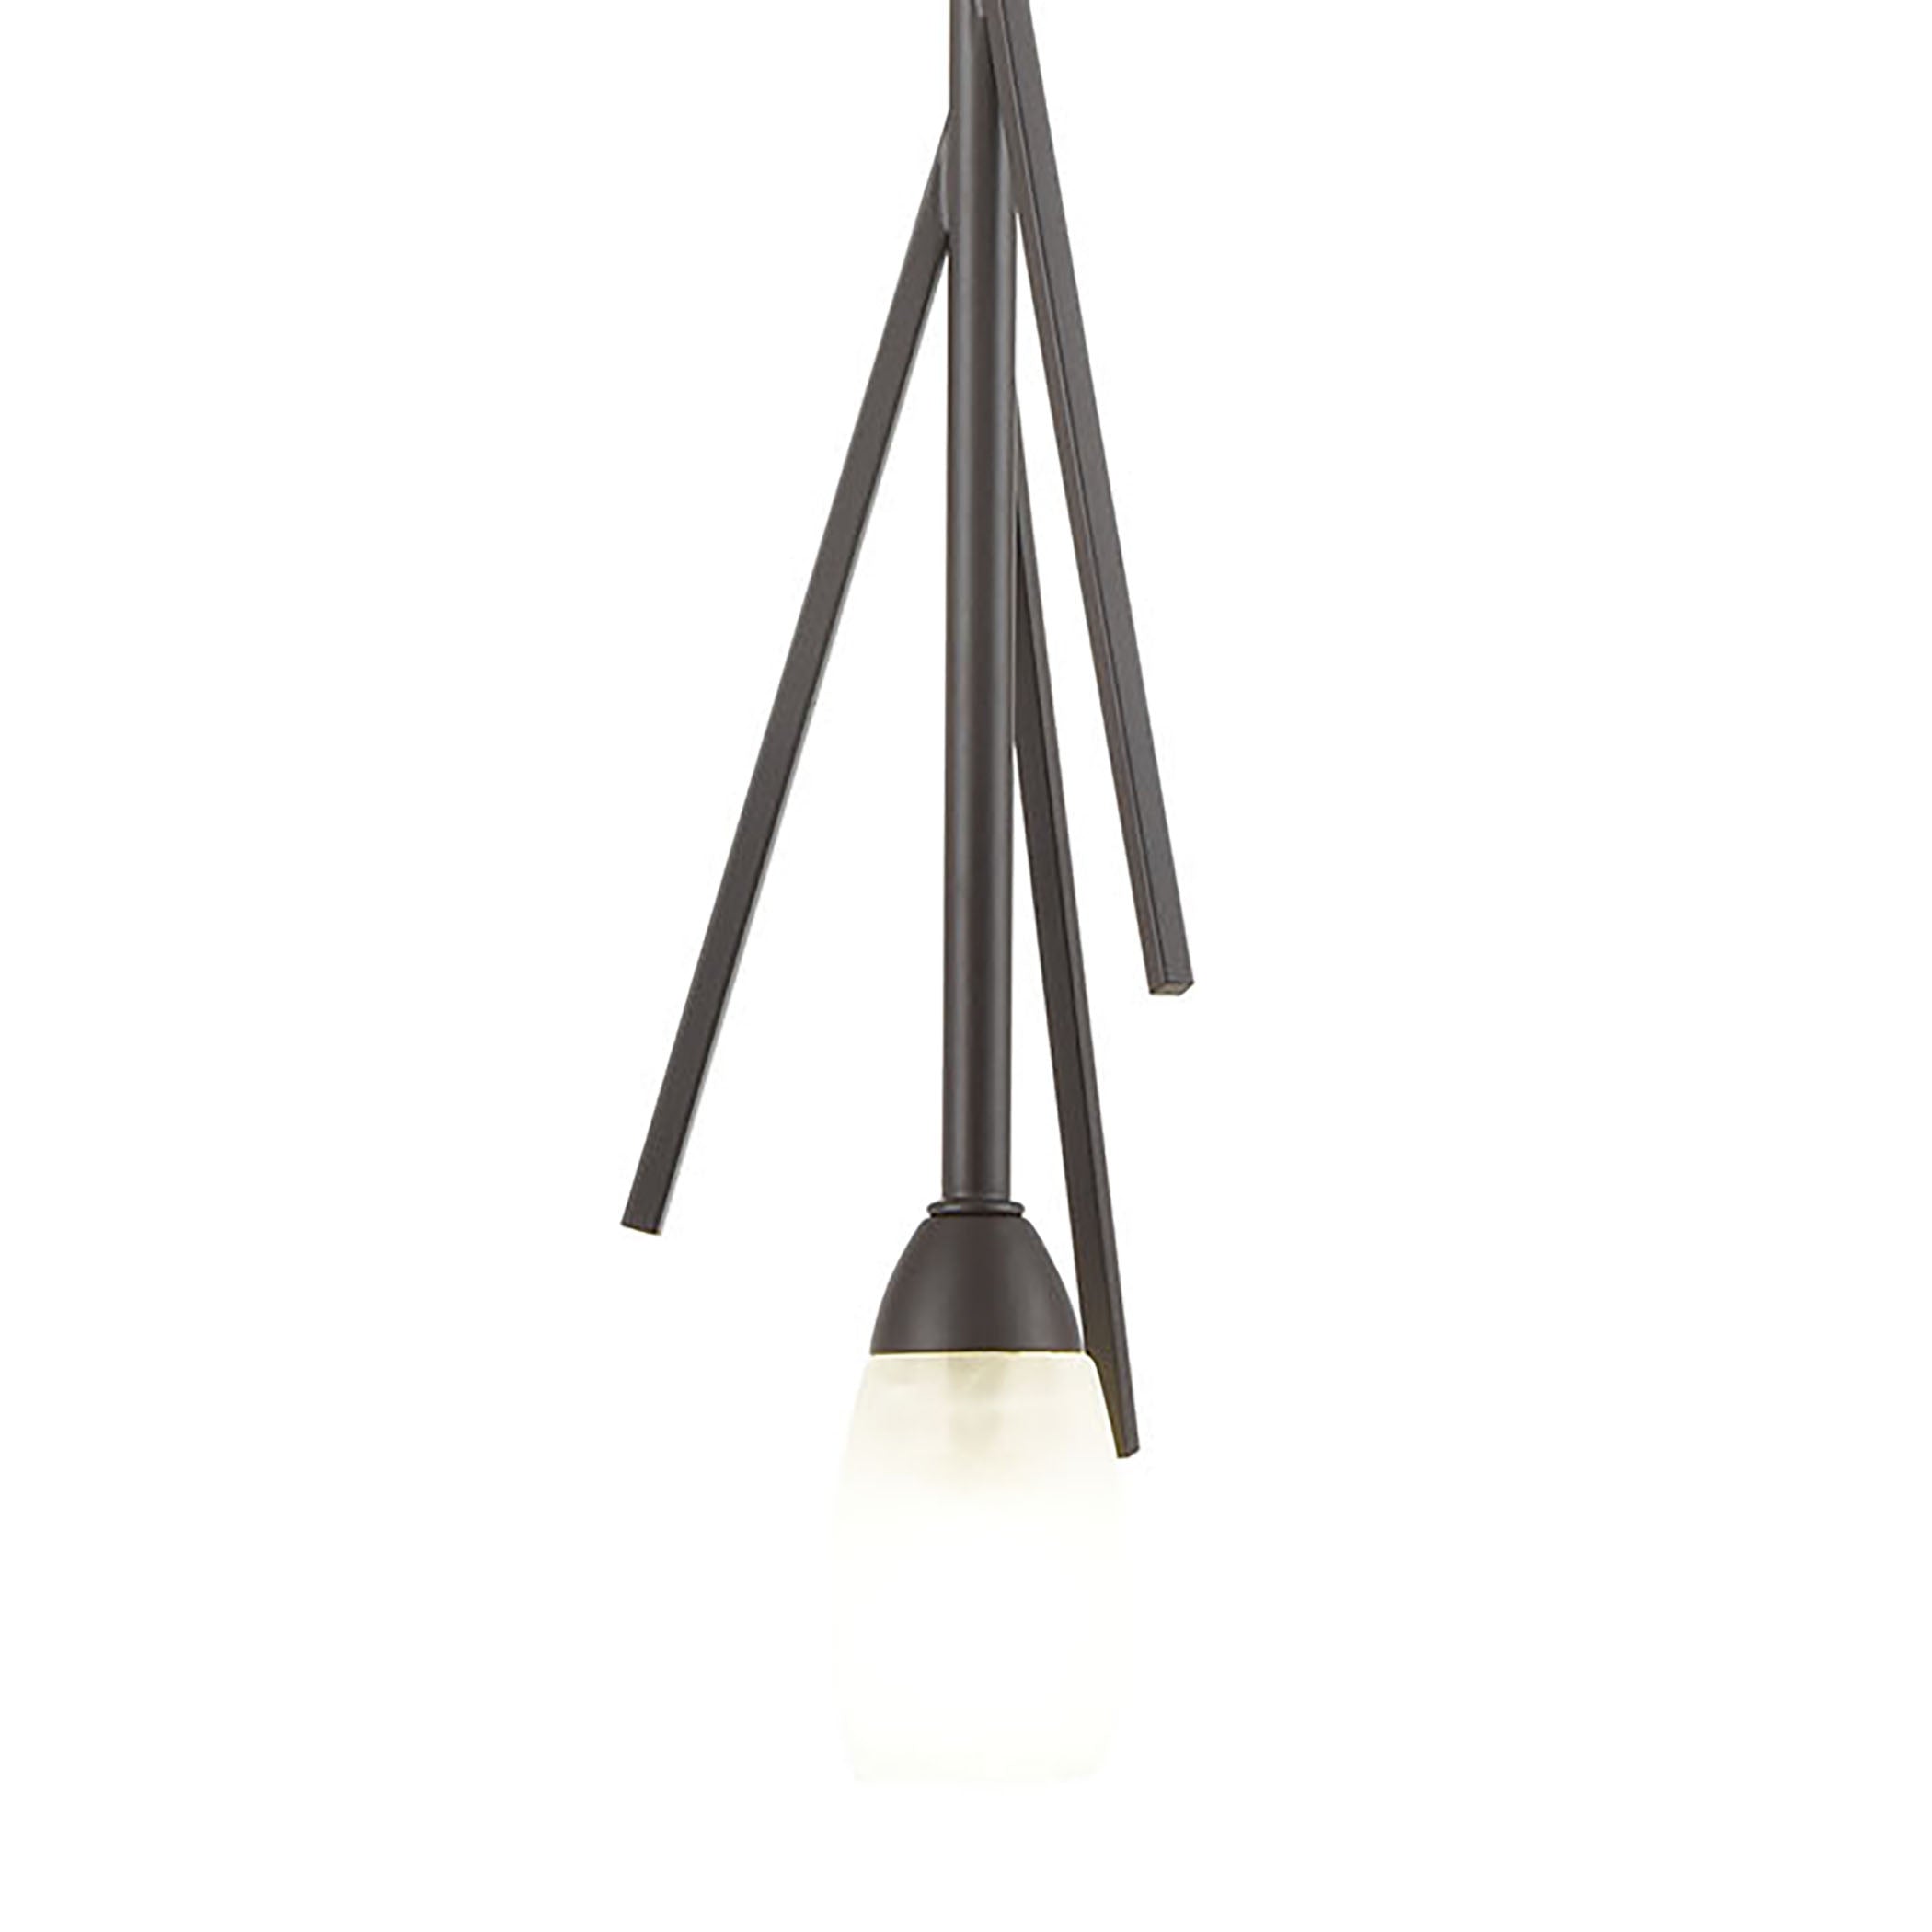 ELK Lighting 18272/1 Ocotillo 1-Light Mini Pendant in Oil Rubbed Bronze with Frosted Glass